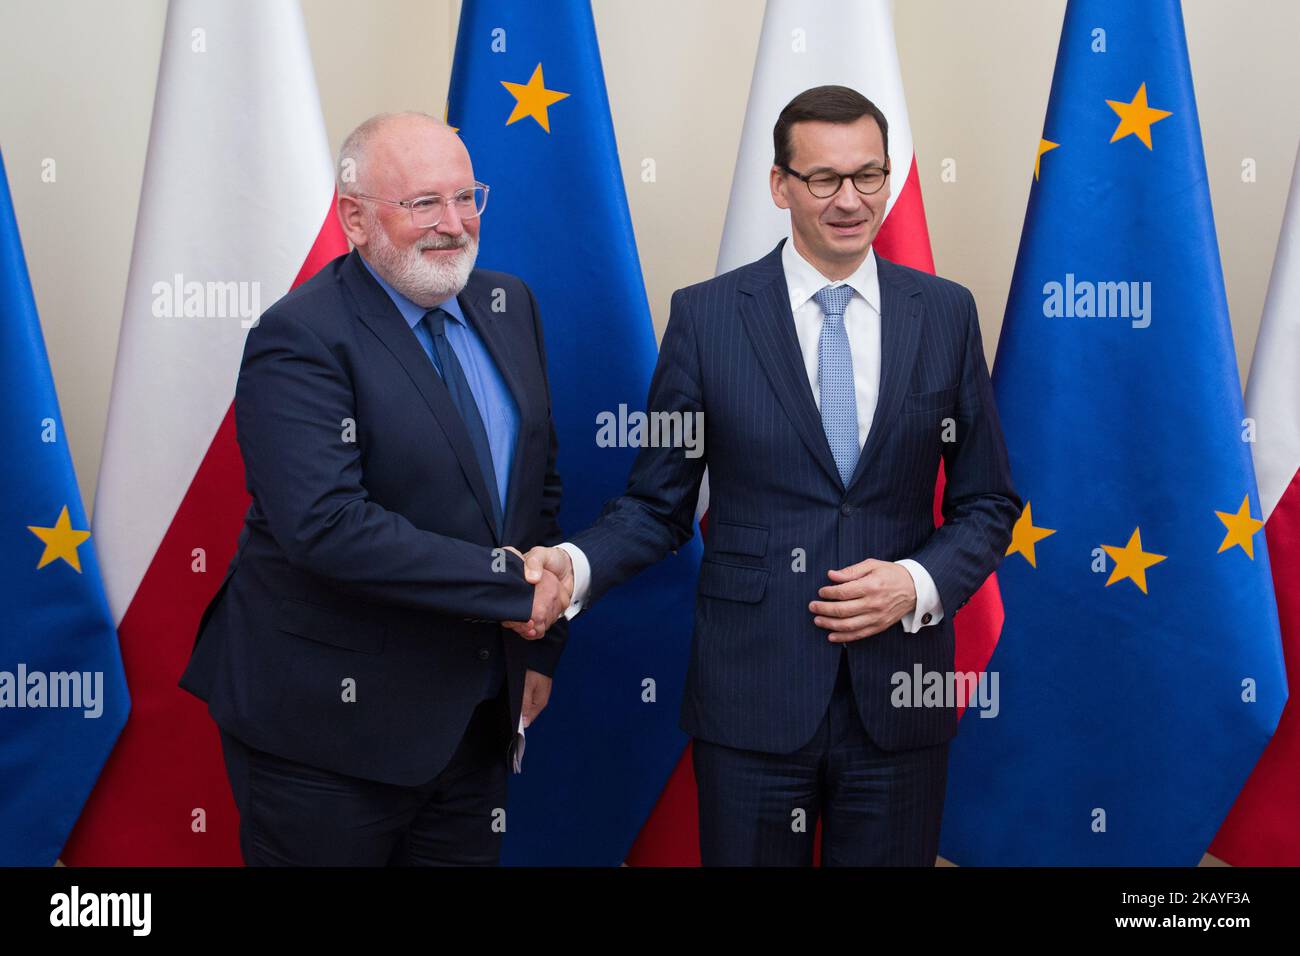 First Vice-President of European Commission Frans Timmermans (L) and Polish Prime Minister Mateusz Morawiecki (R) during a meeting at Chancellery of the Prime Minister in Warsaw, Poland on 18 June 2018. PM Morawiecki and Timmermans will discuss the rule of law in Poland (Photo by Mateusz Wlodarczyk/NurPhoto) Stock Photo